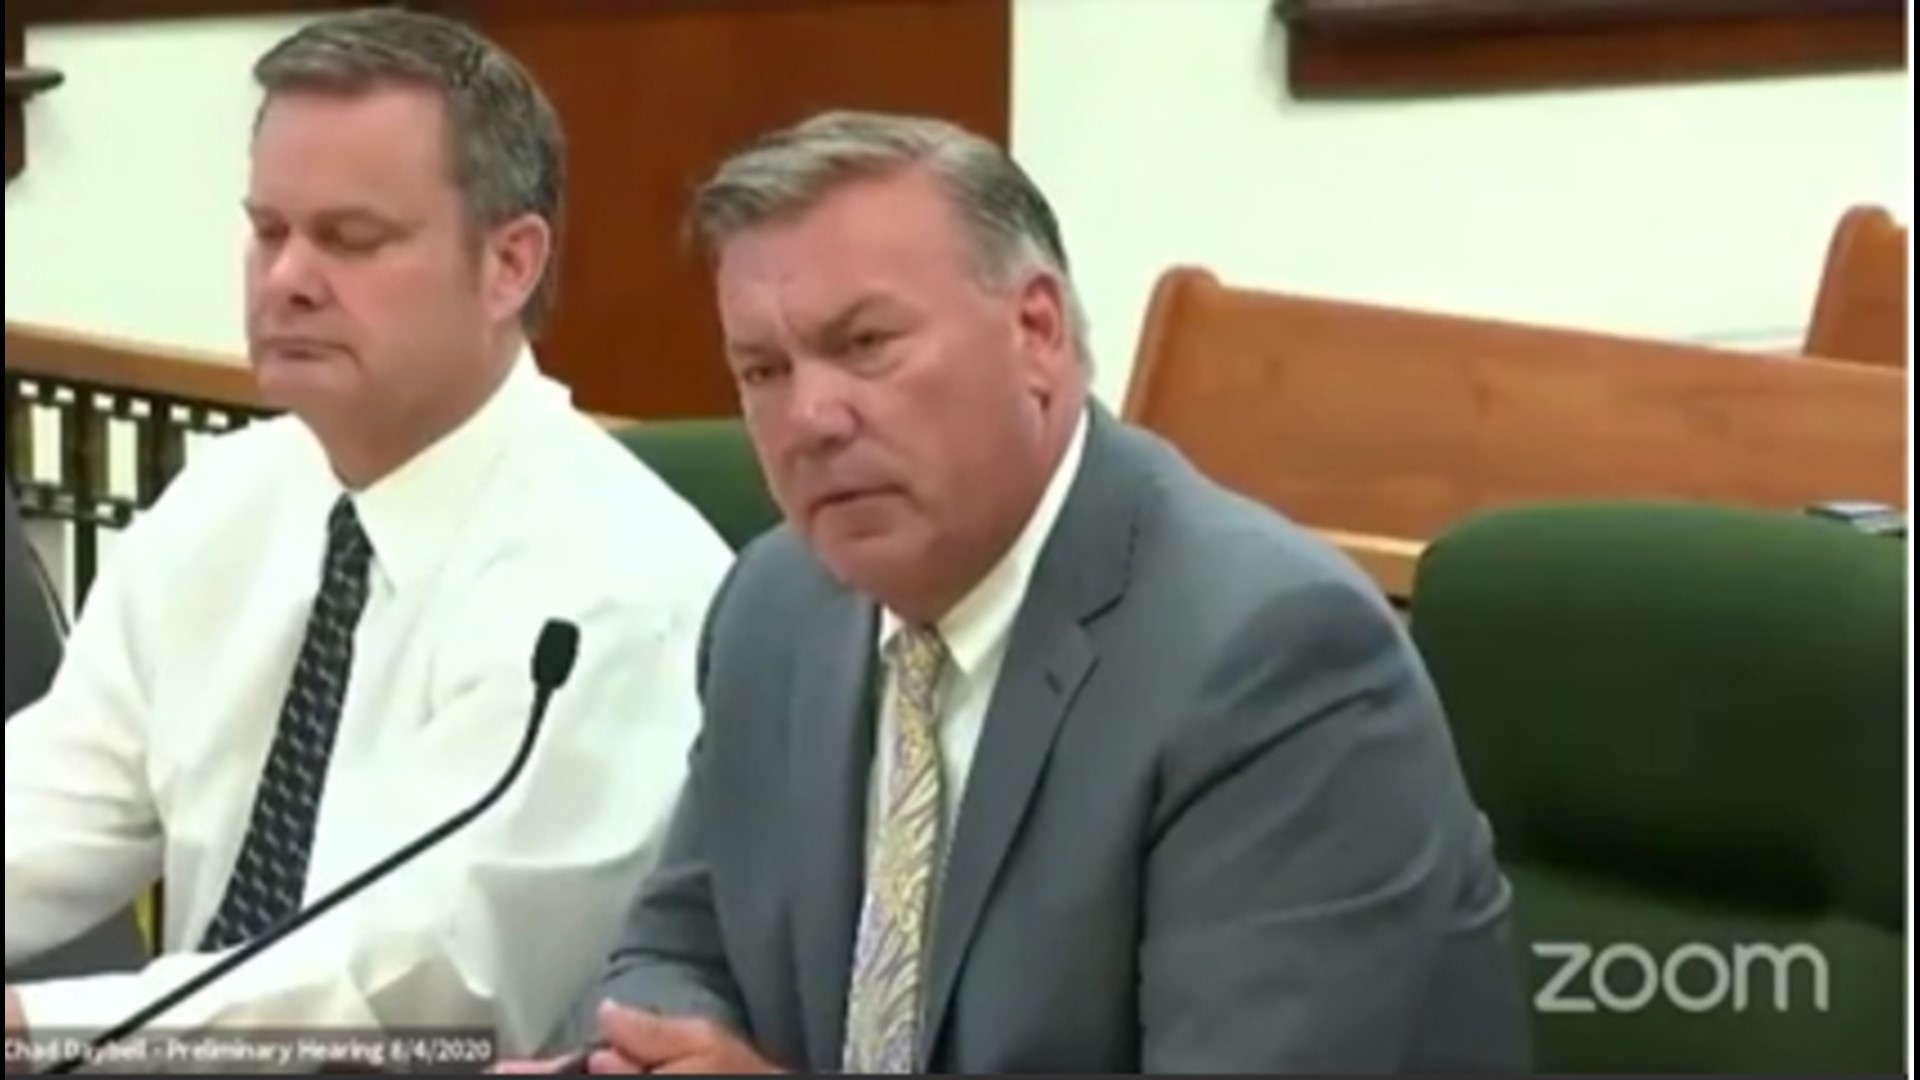 Attorney's request to withdraw from Chad Daybell case denied | ktvb.com